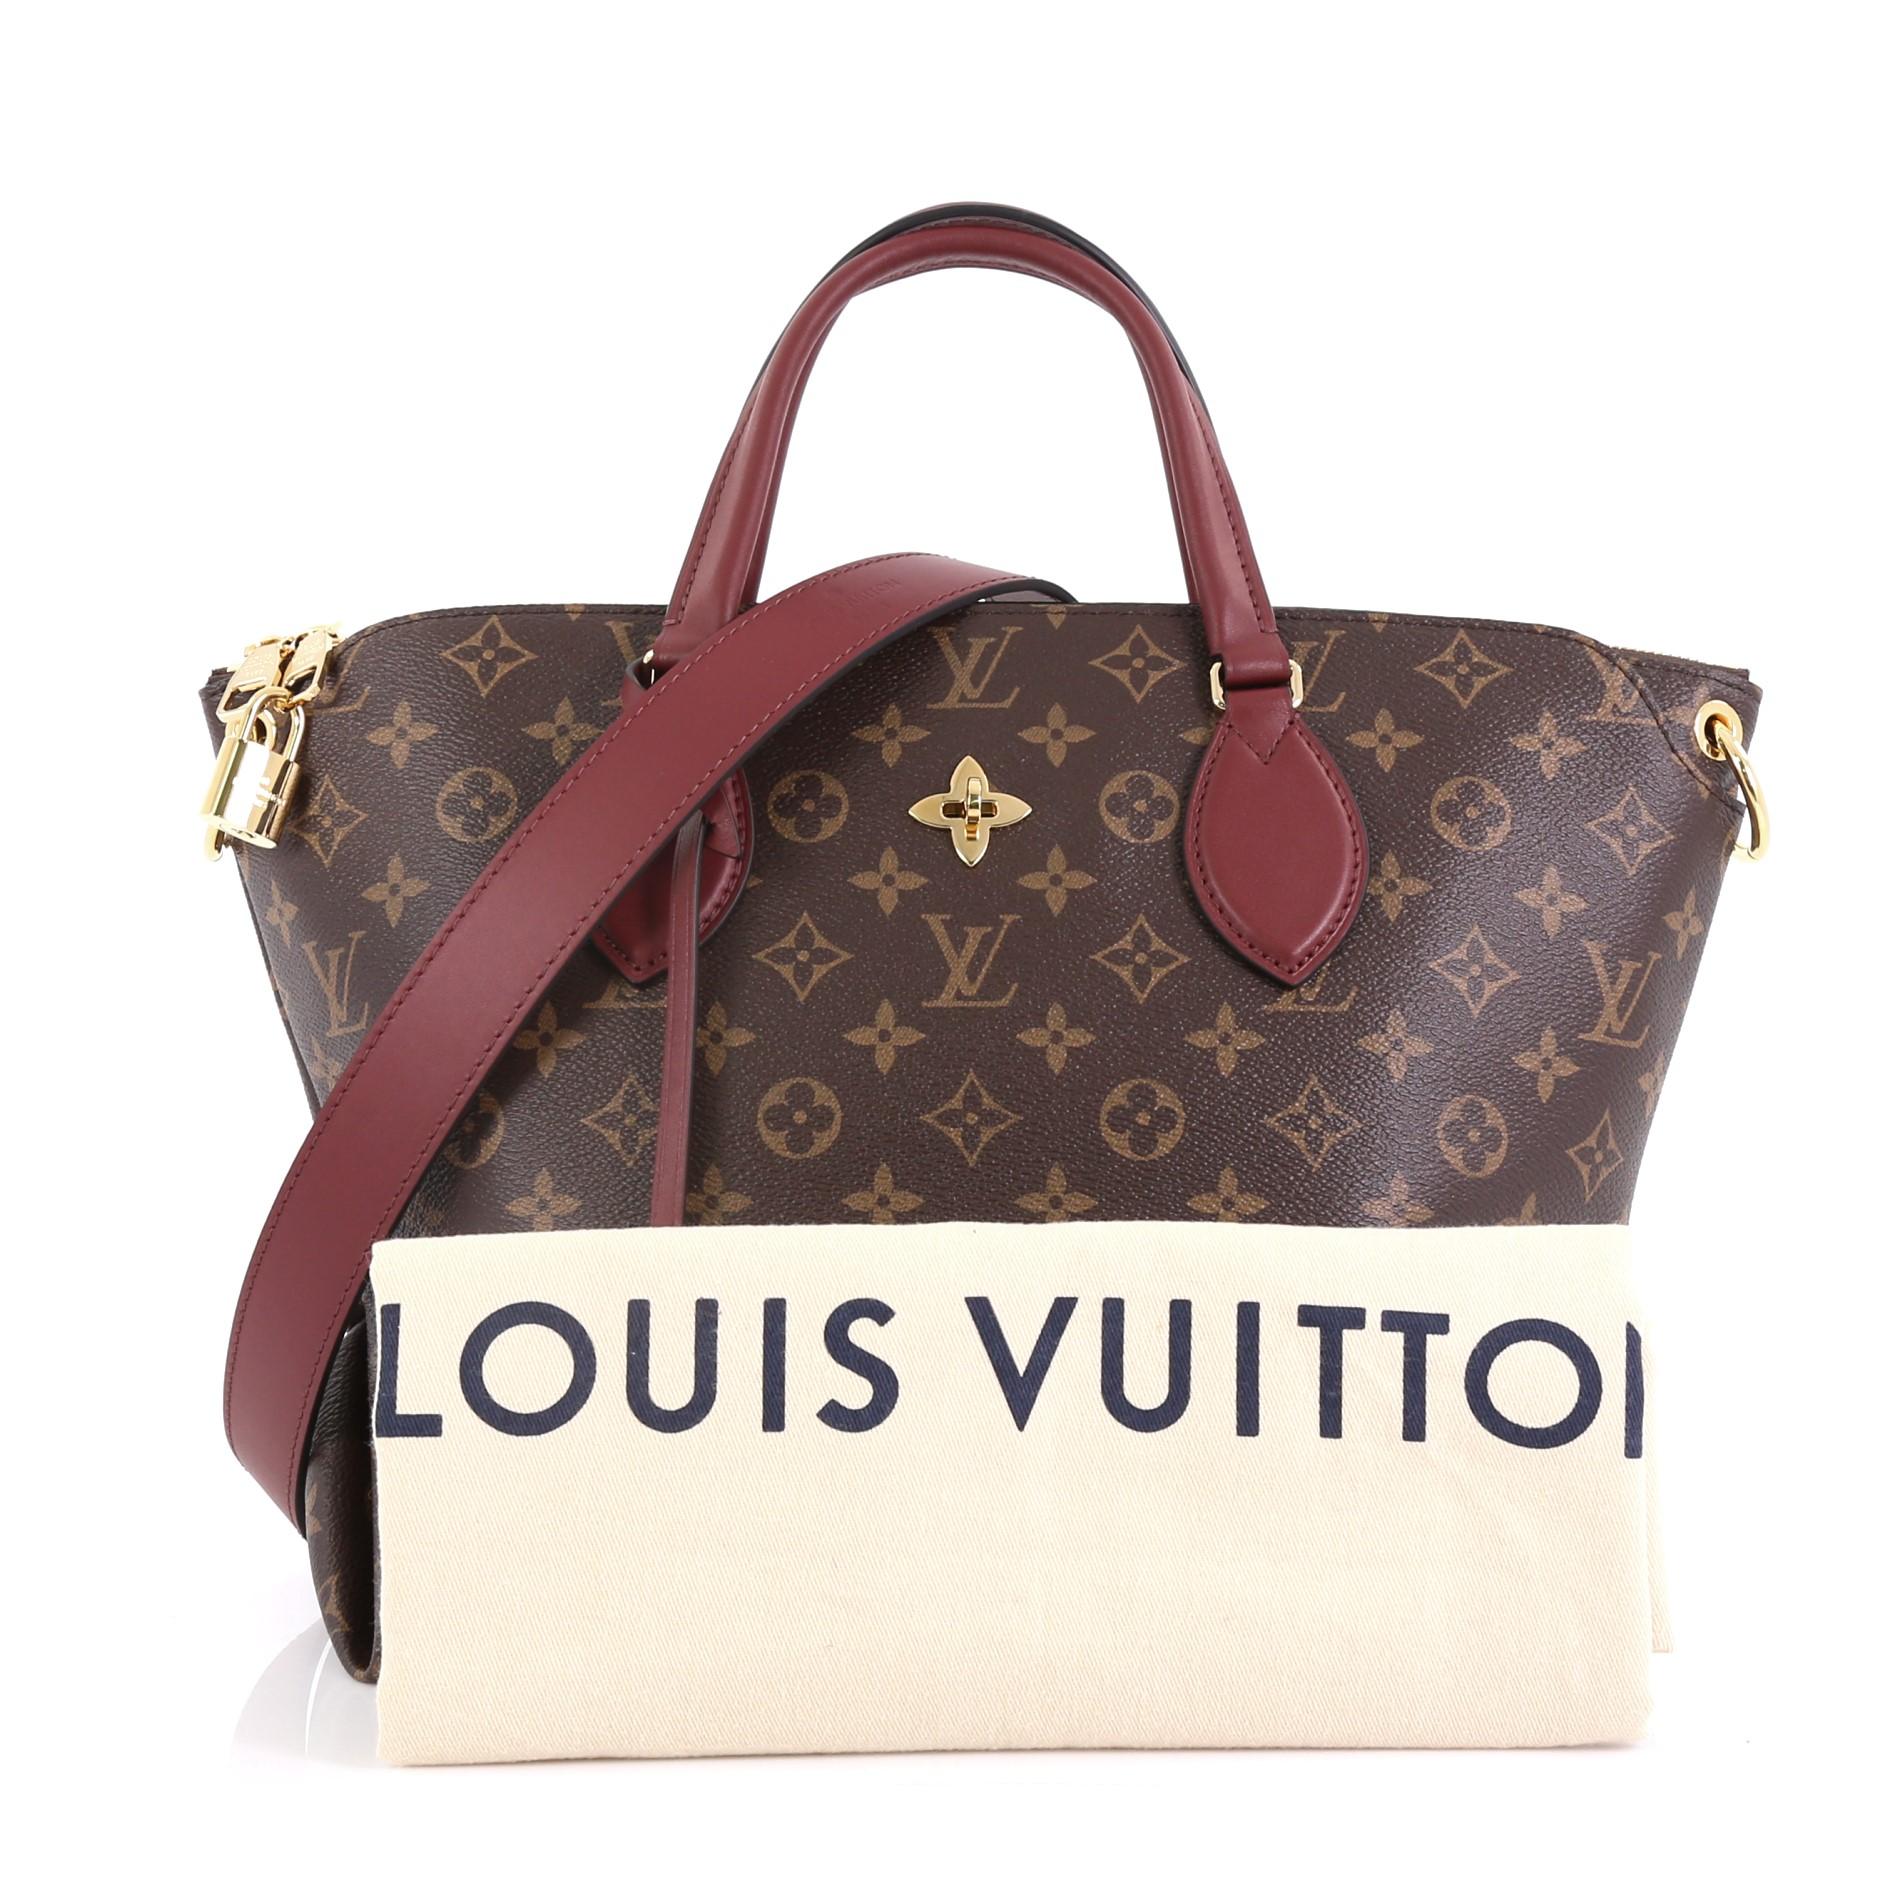 This Louis Vuitton Flower Zipped Tote Monogram Canvas MM, crafted in brown monogram coated canvas, features dual leather handles, turn lock with fleur detail, and gold-tone hardware. It opens to a partitioned burgundy microfiber interior with flat